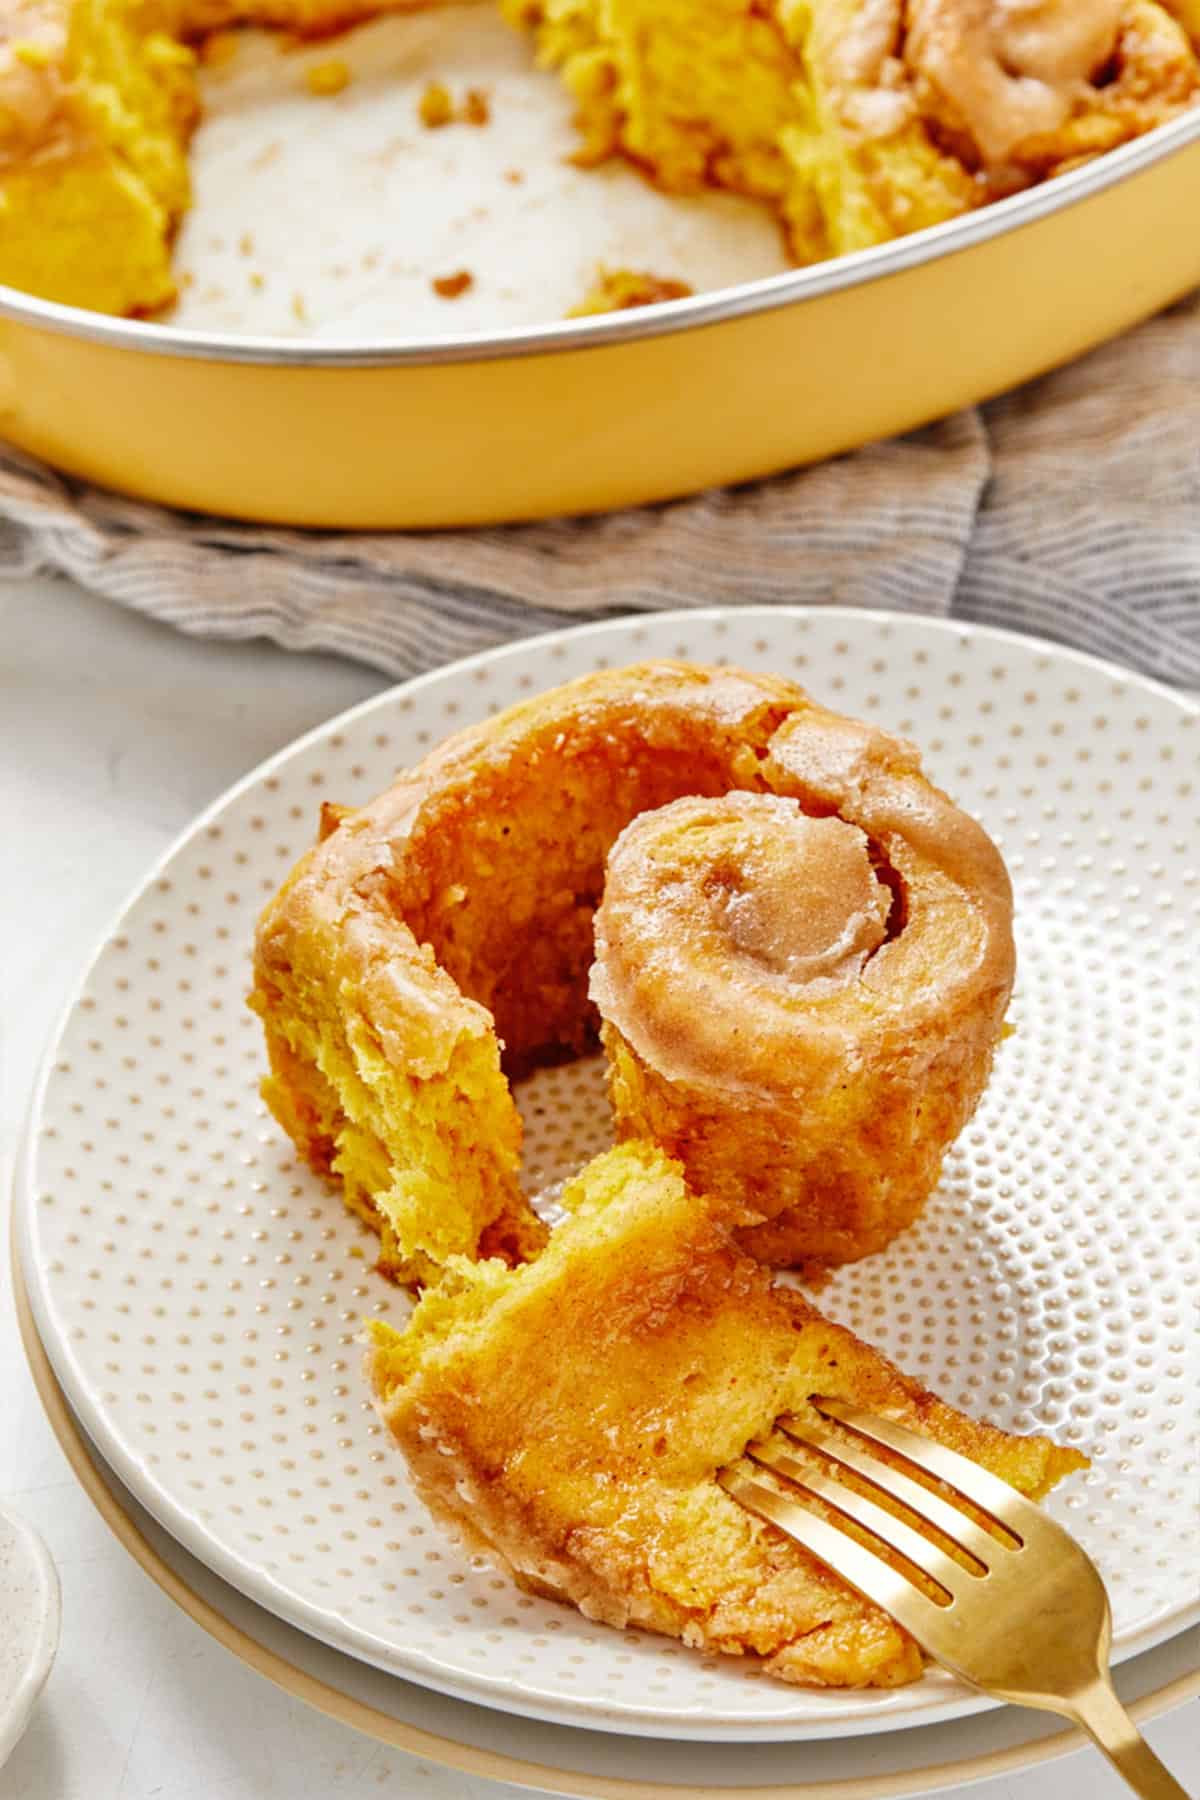 A partially eaten cinnamon roll with pumpkin on a plate with an upside down fork.